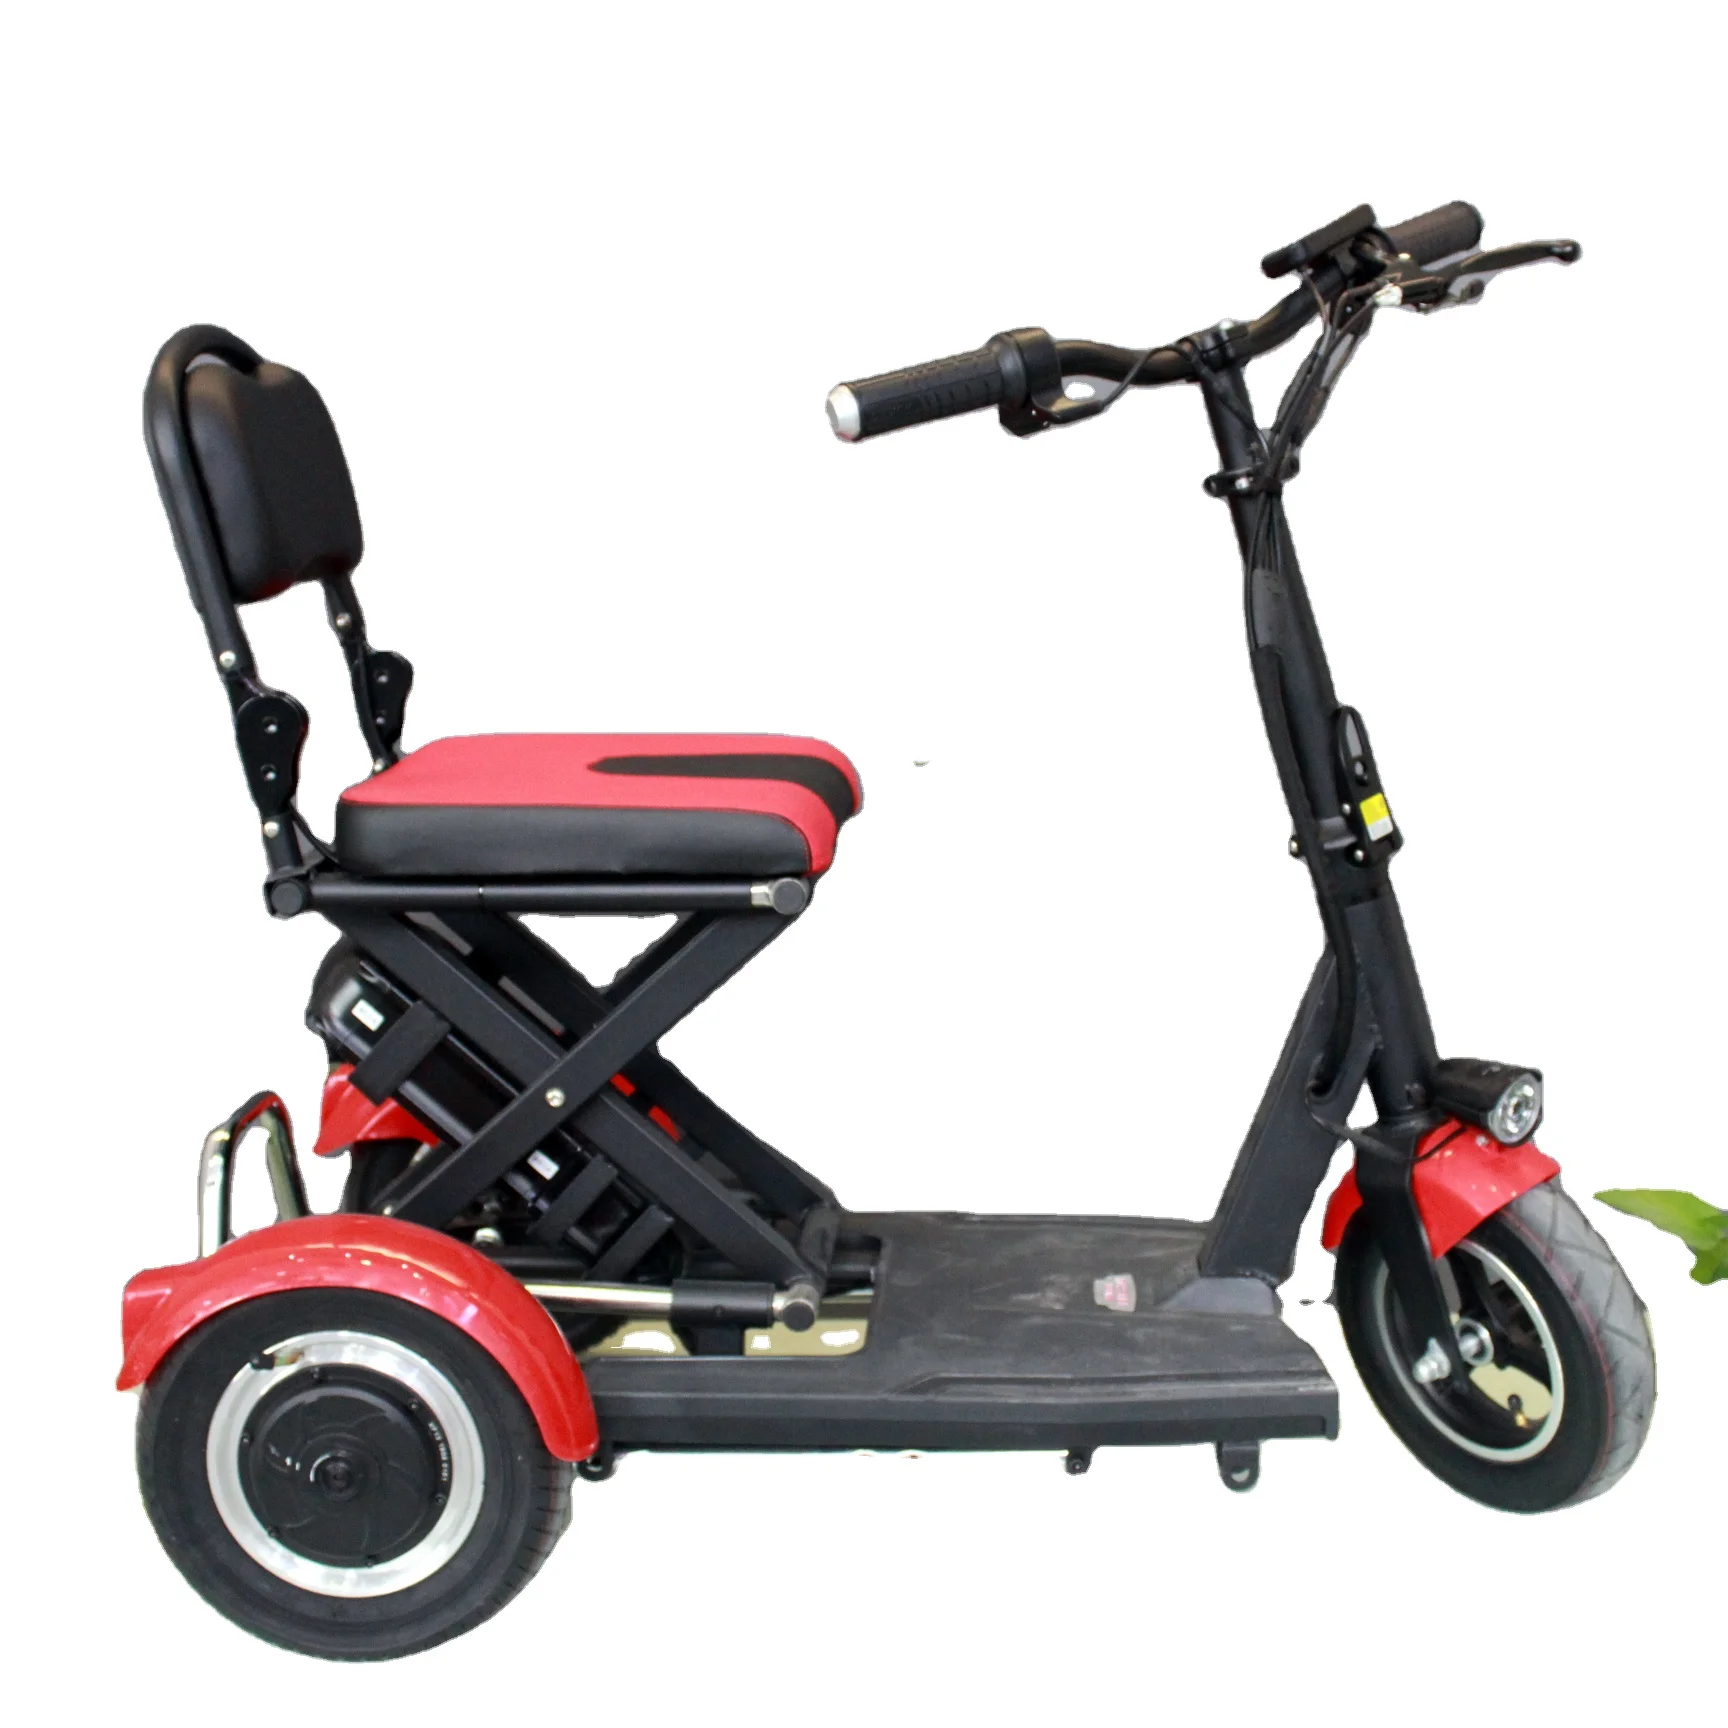 Electric Scooter Folding Type For Elderly And Disabled Handicapped Scooters 36v/48v 10Ah Lithium Battery Motor Scooter custom samebike sy26 electric bike 26 inch 350w motor 36v 10ah battery 35km h speed front and rear disc brake white